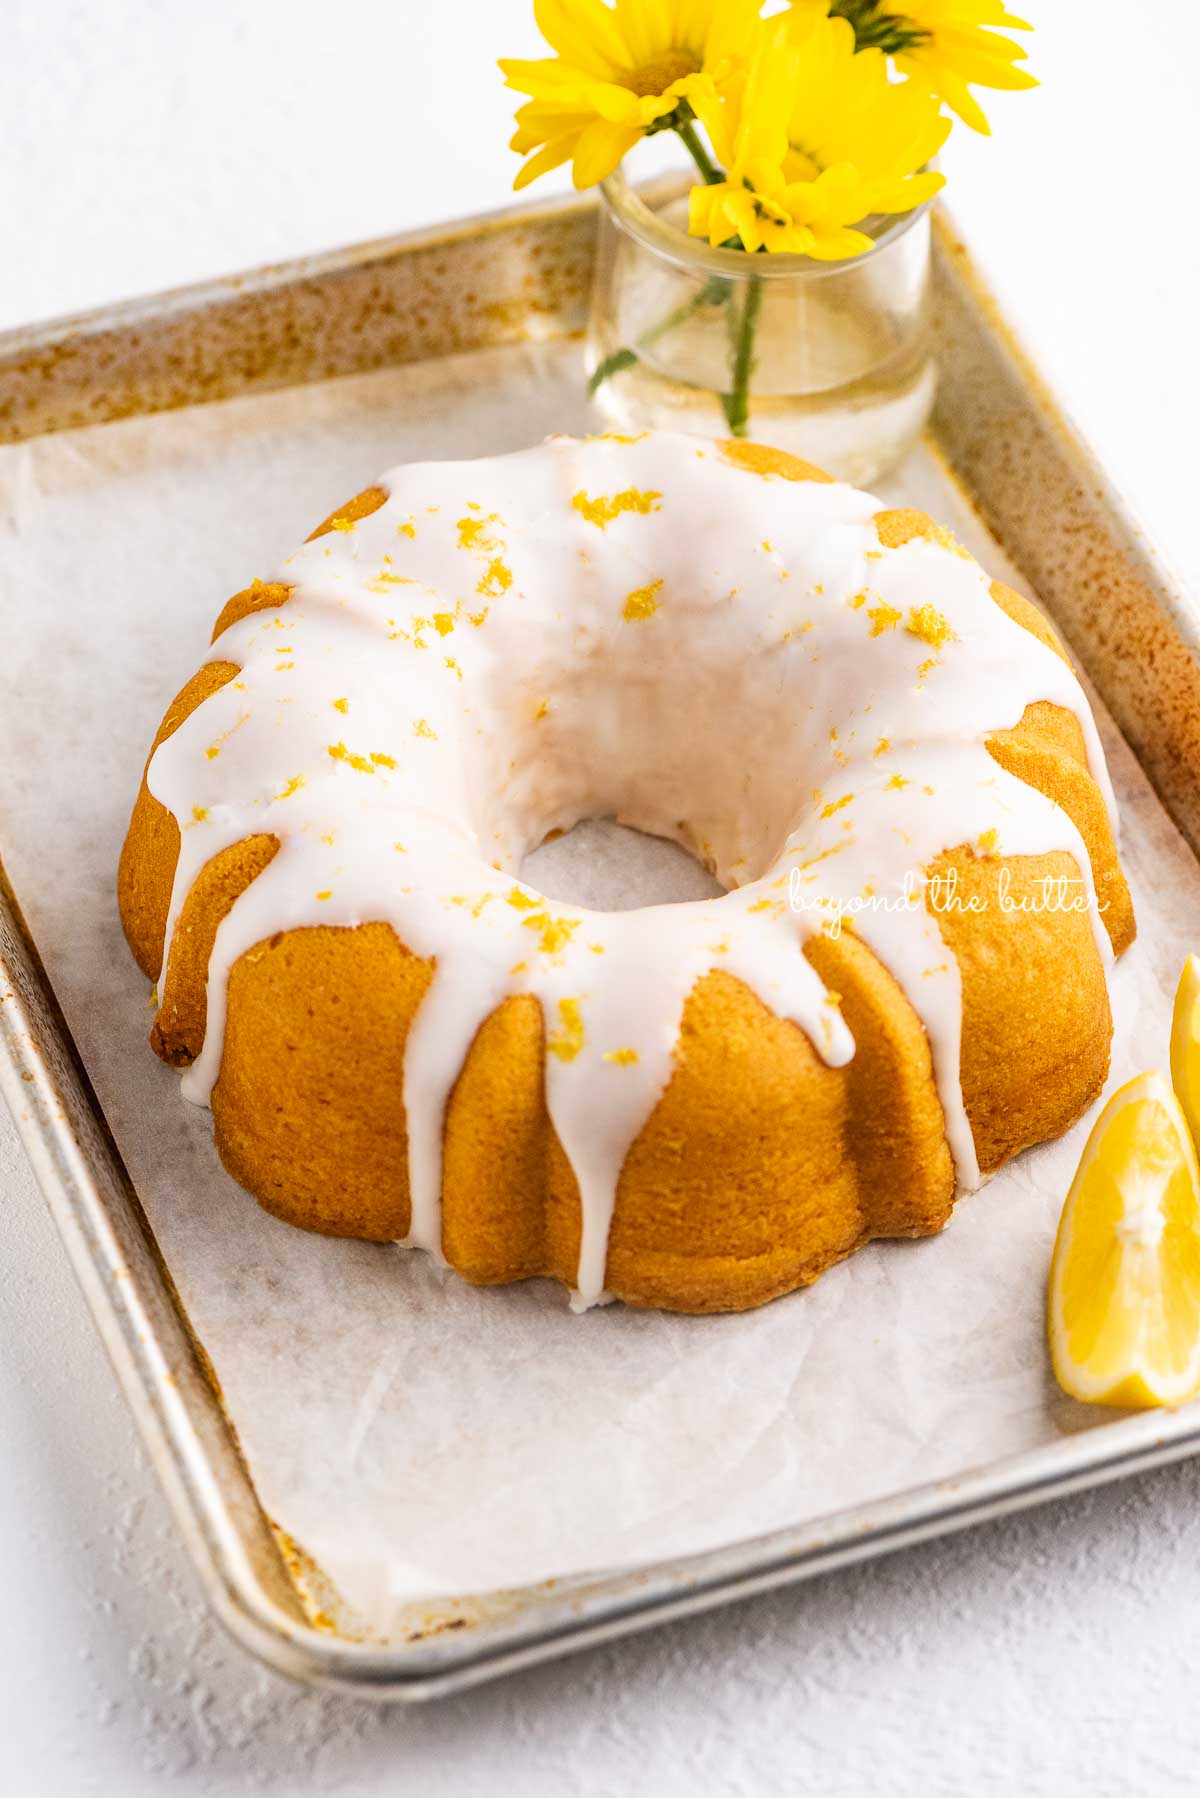 Small lemon cream cheese pound cake topped with a simple lemon glaze on a parchment paper lined baking sheet with sliced lemons and small bouquet of daisies | © Beyond the Butter®